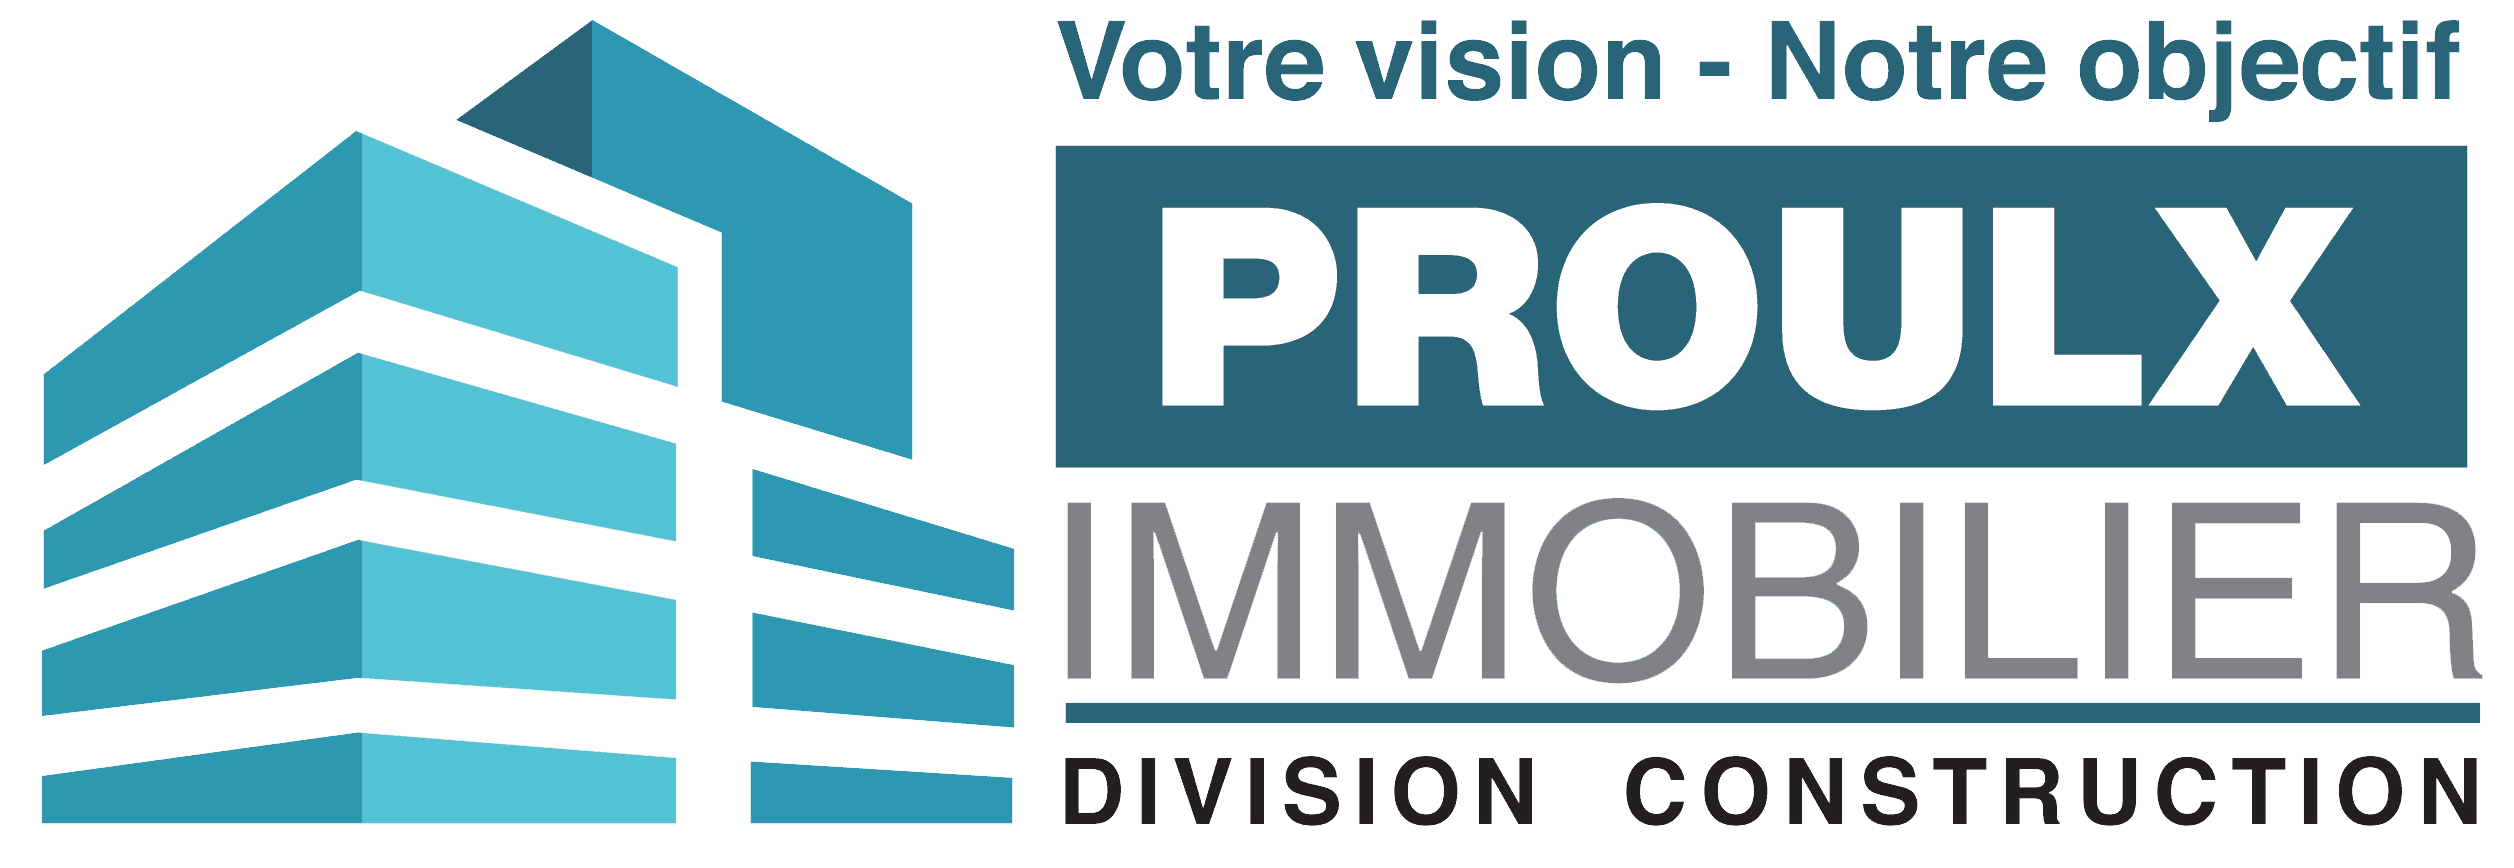 Proulx Immobilier